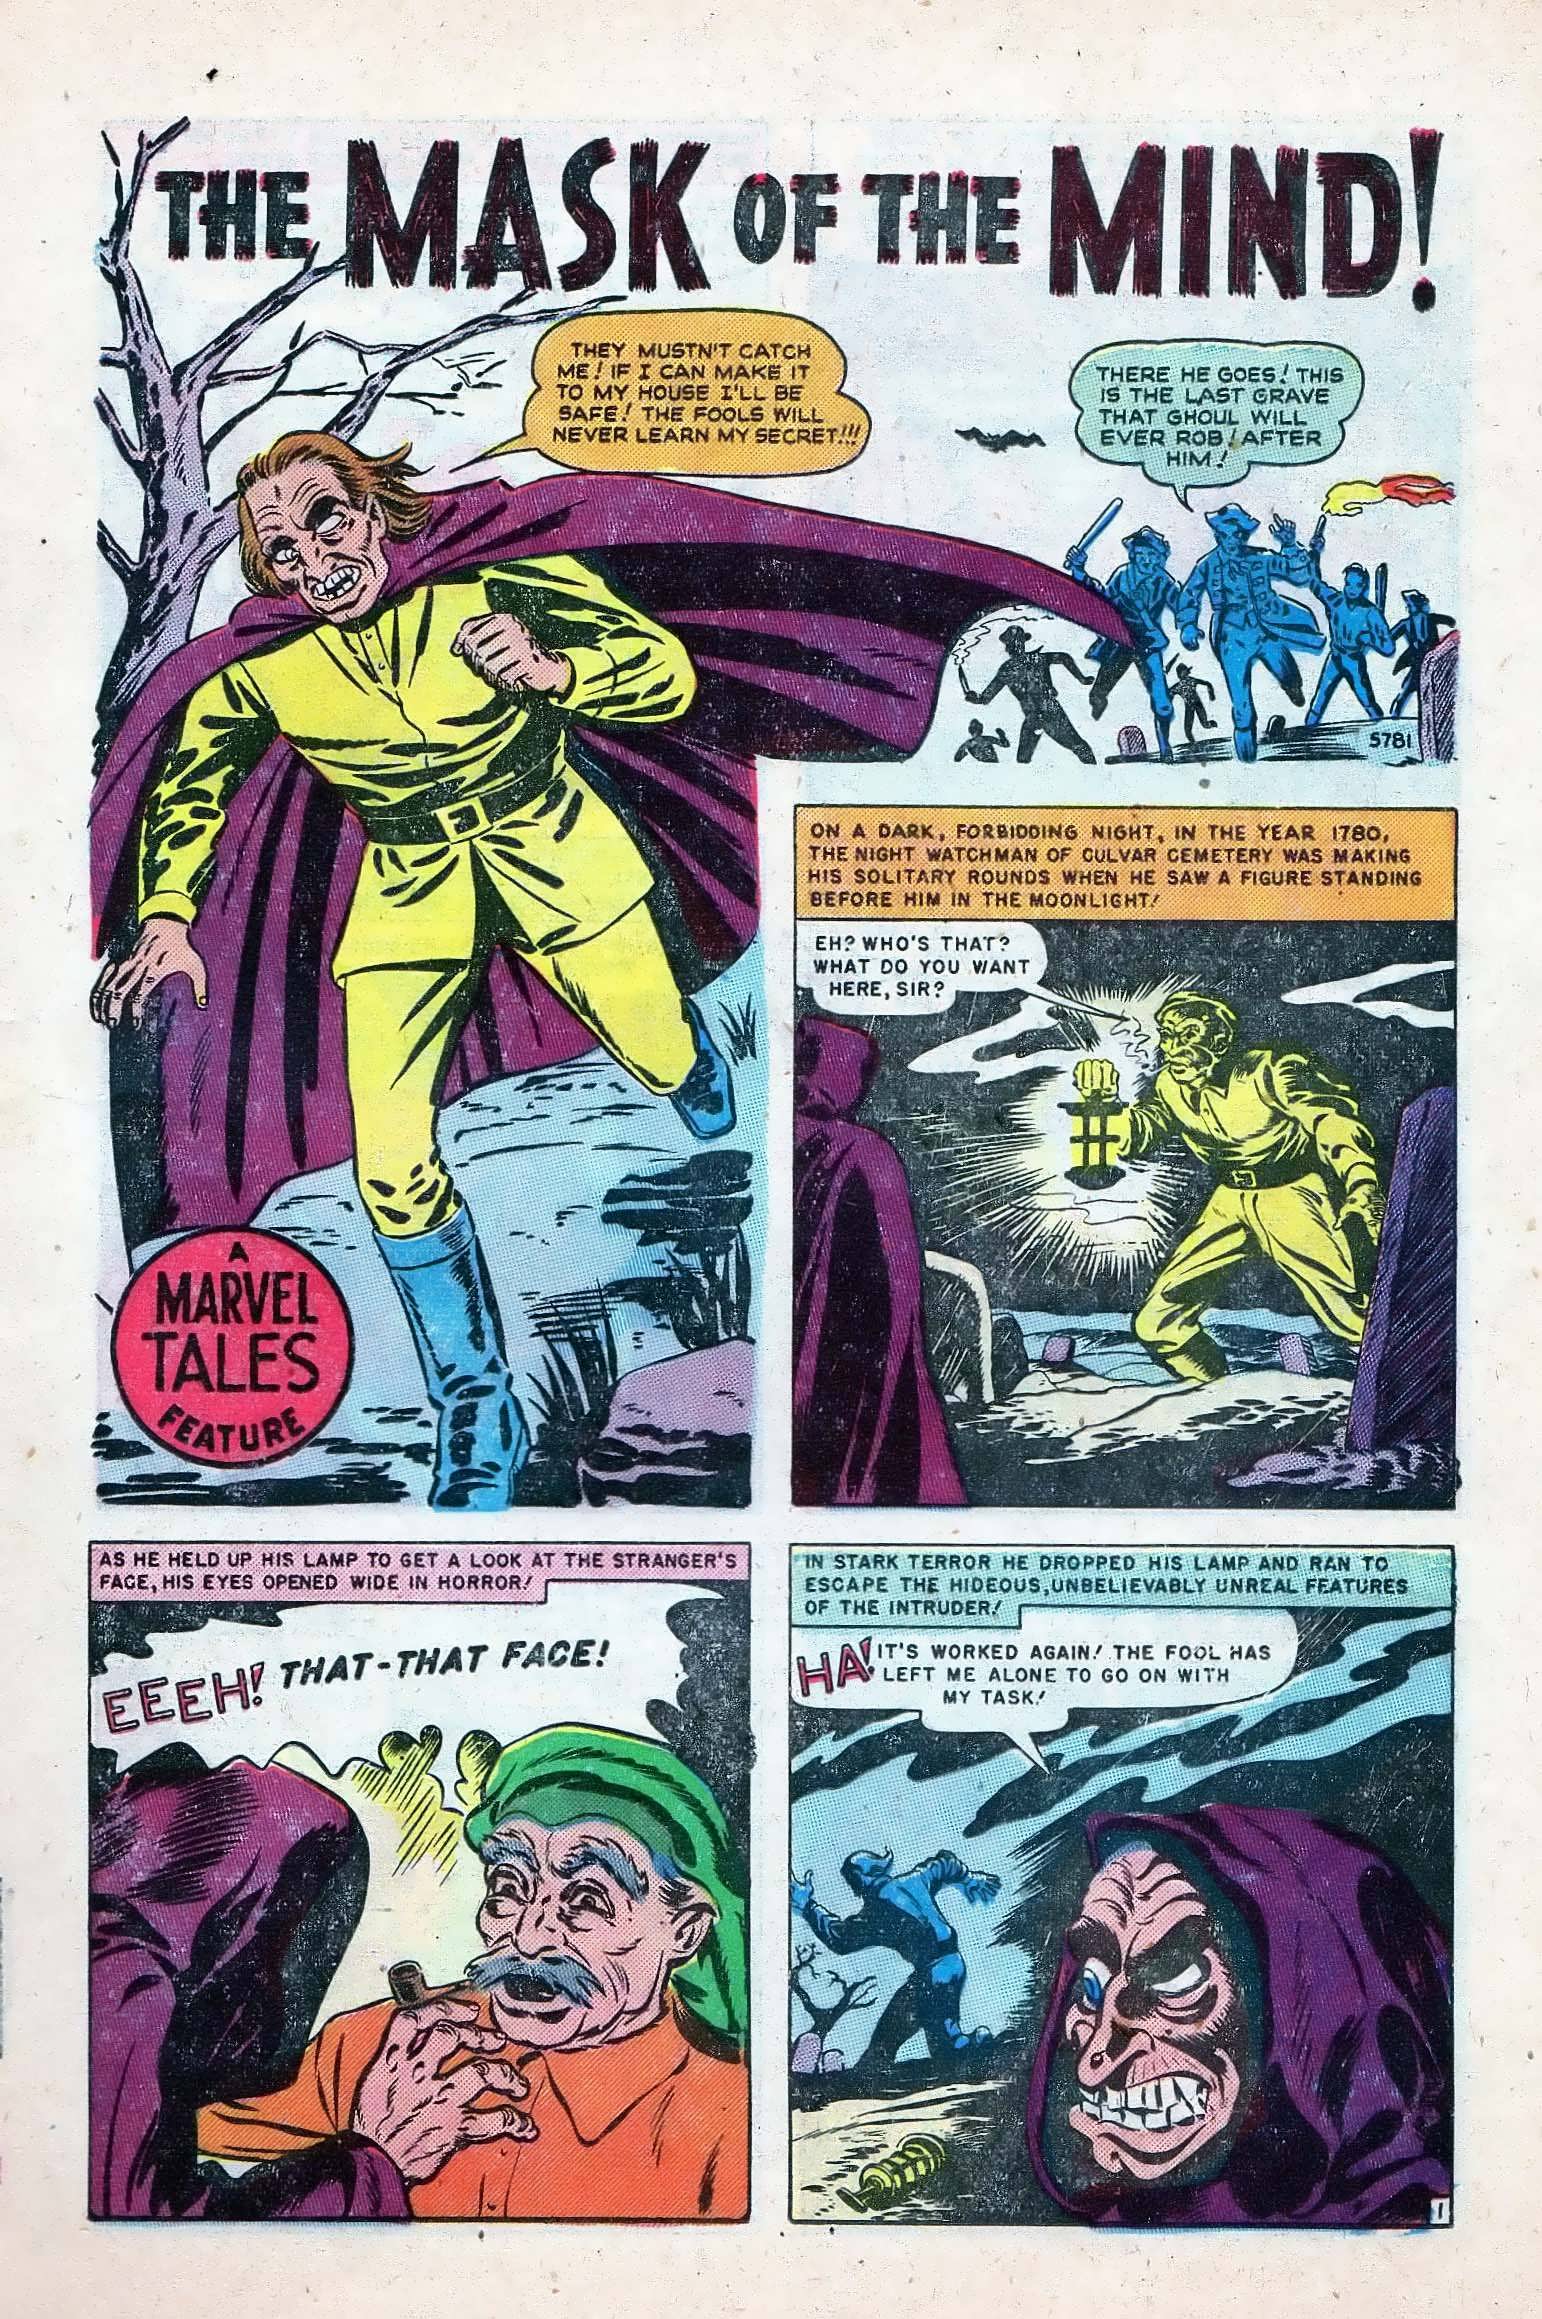 Marvel Tales (1949) 96 Page 22